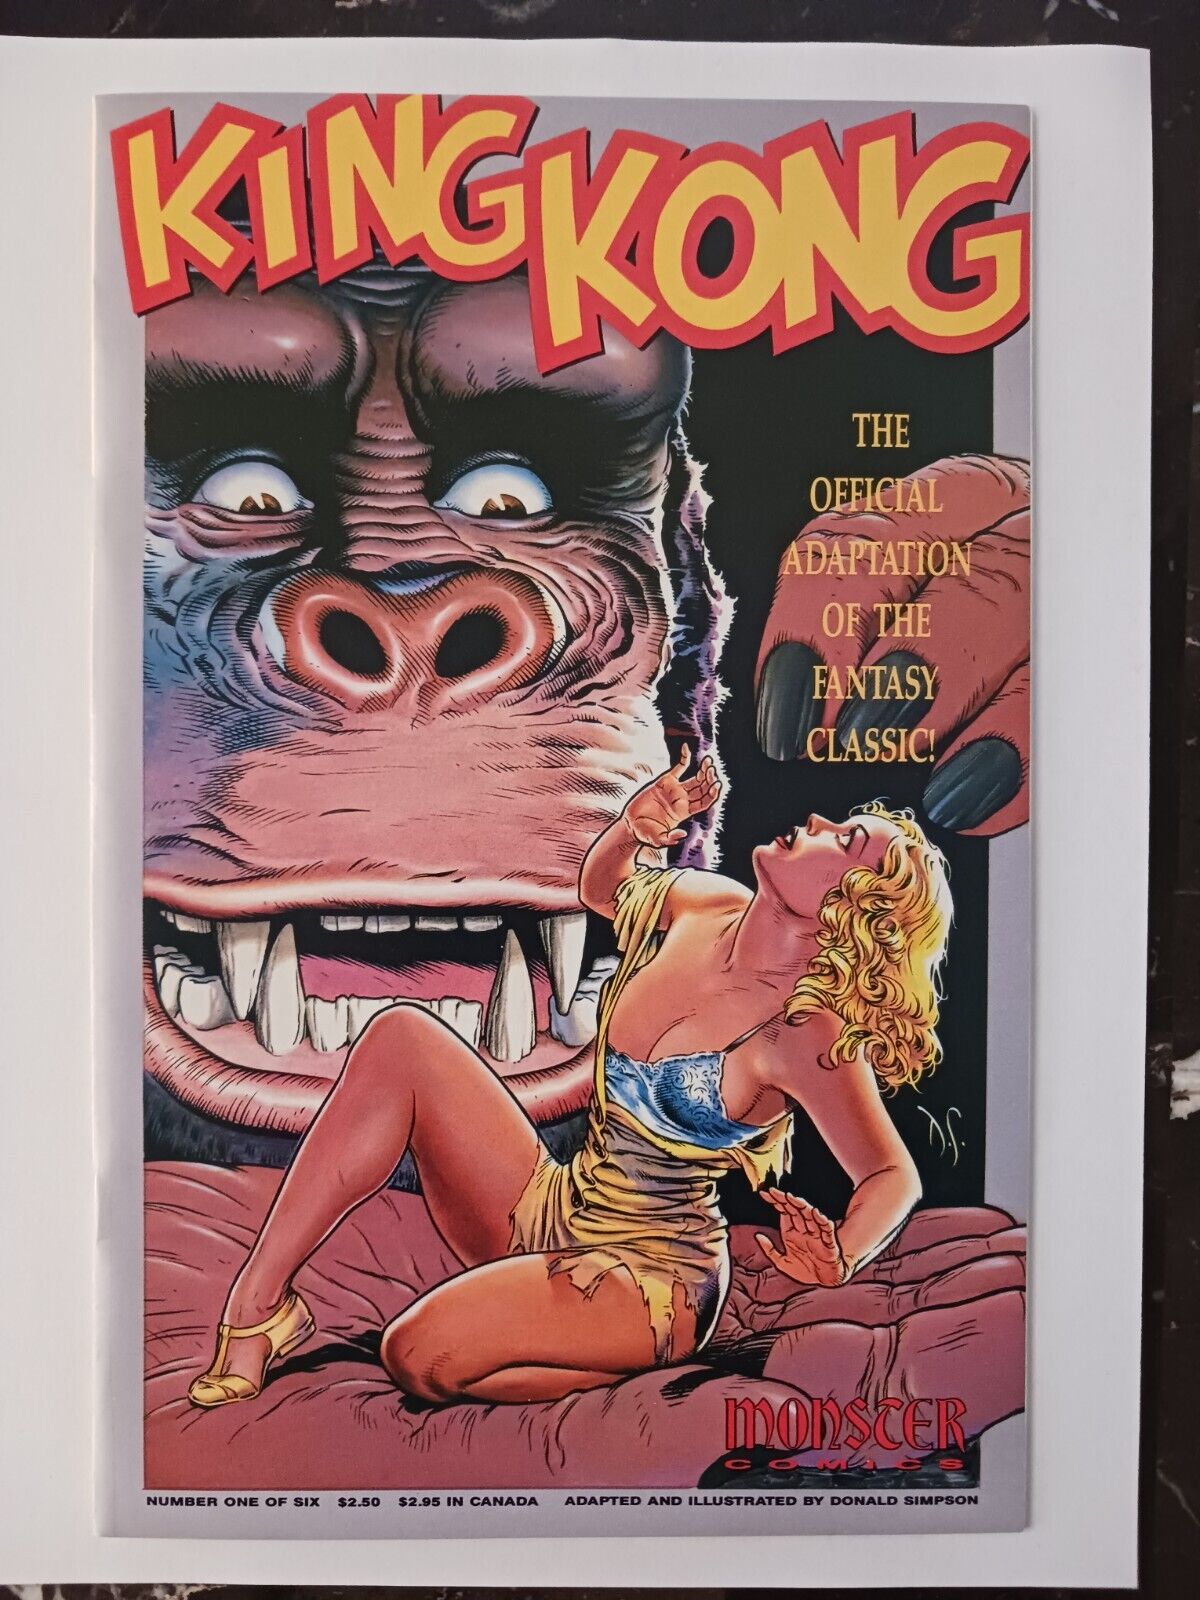 KING KONG #1 - Iconic Dave Stevens cover- NM or better